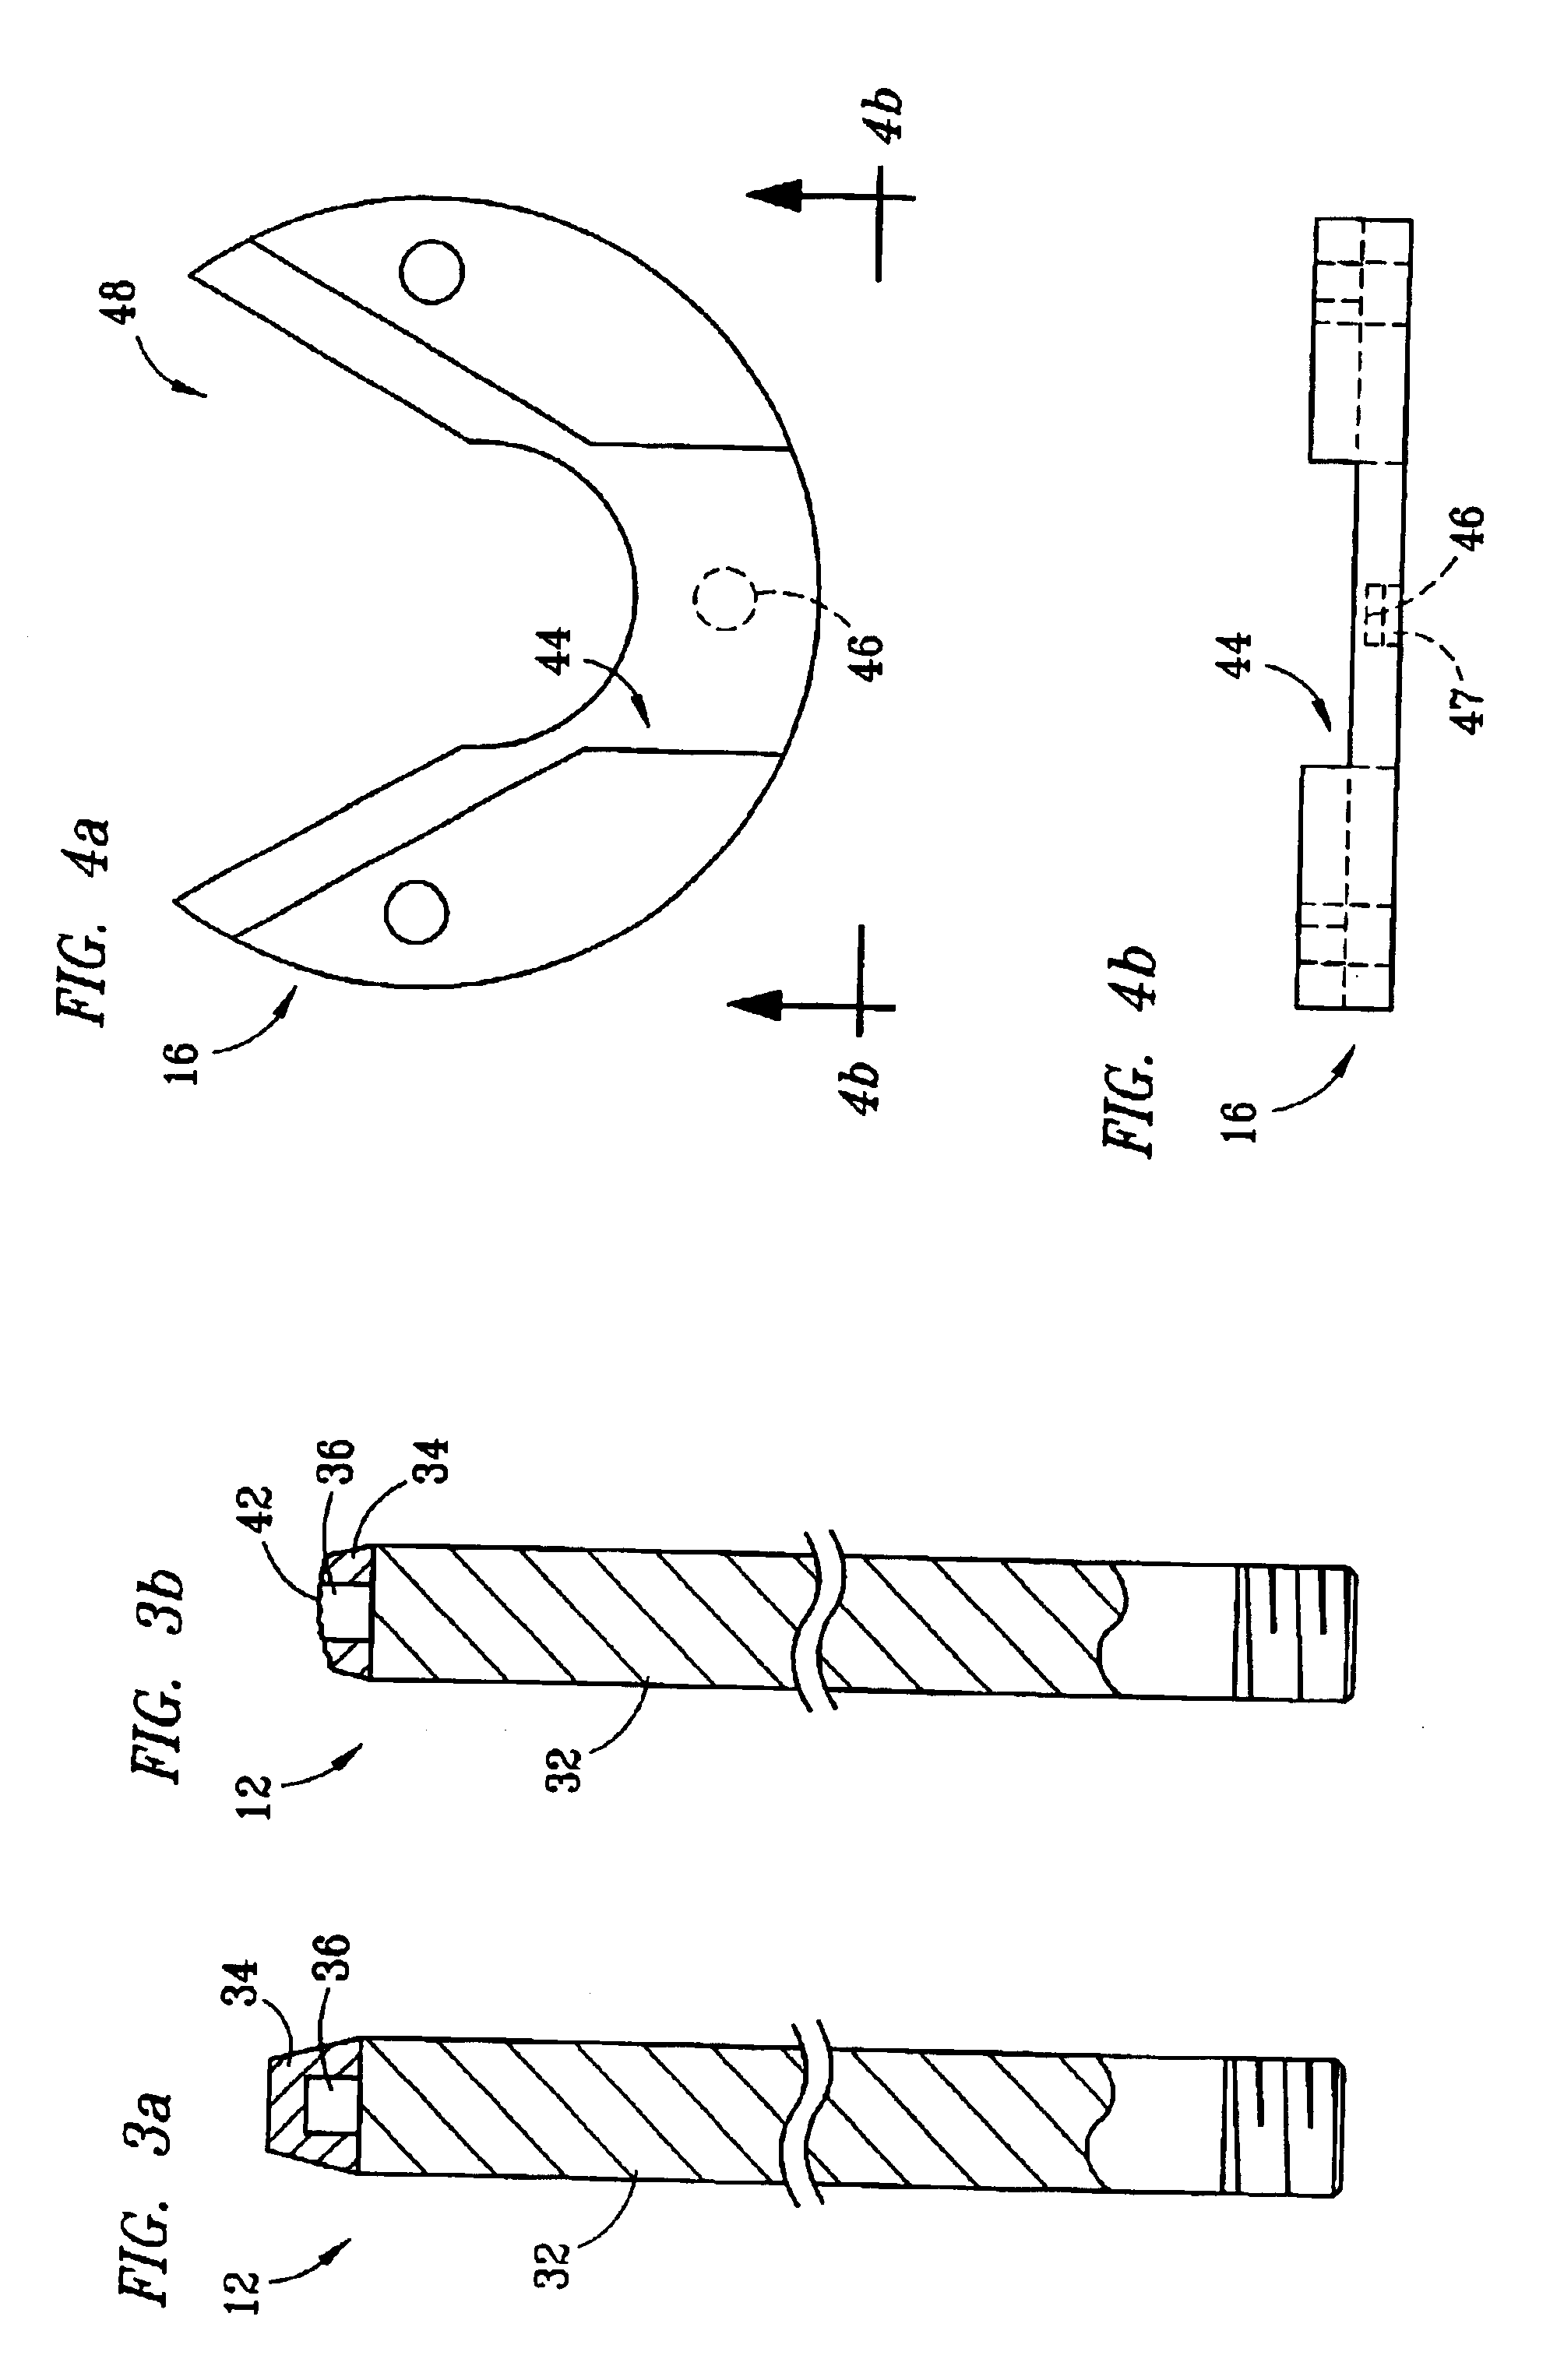 Method and apparatus for determining electrical contact wear